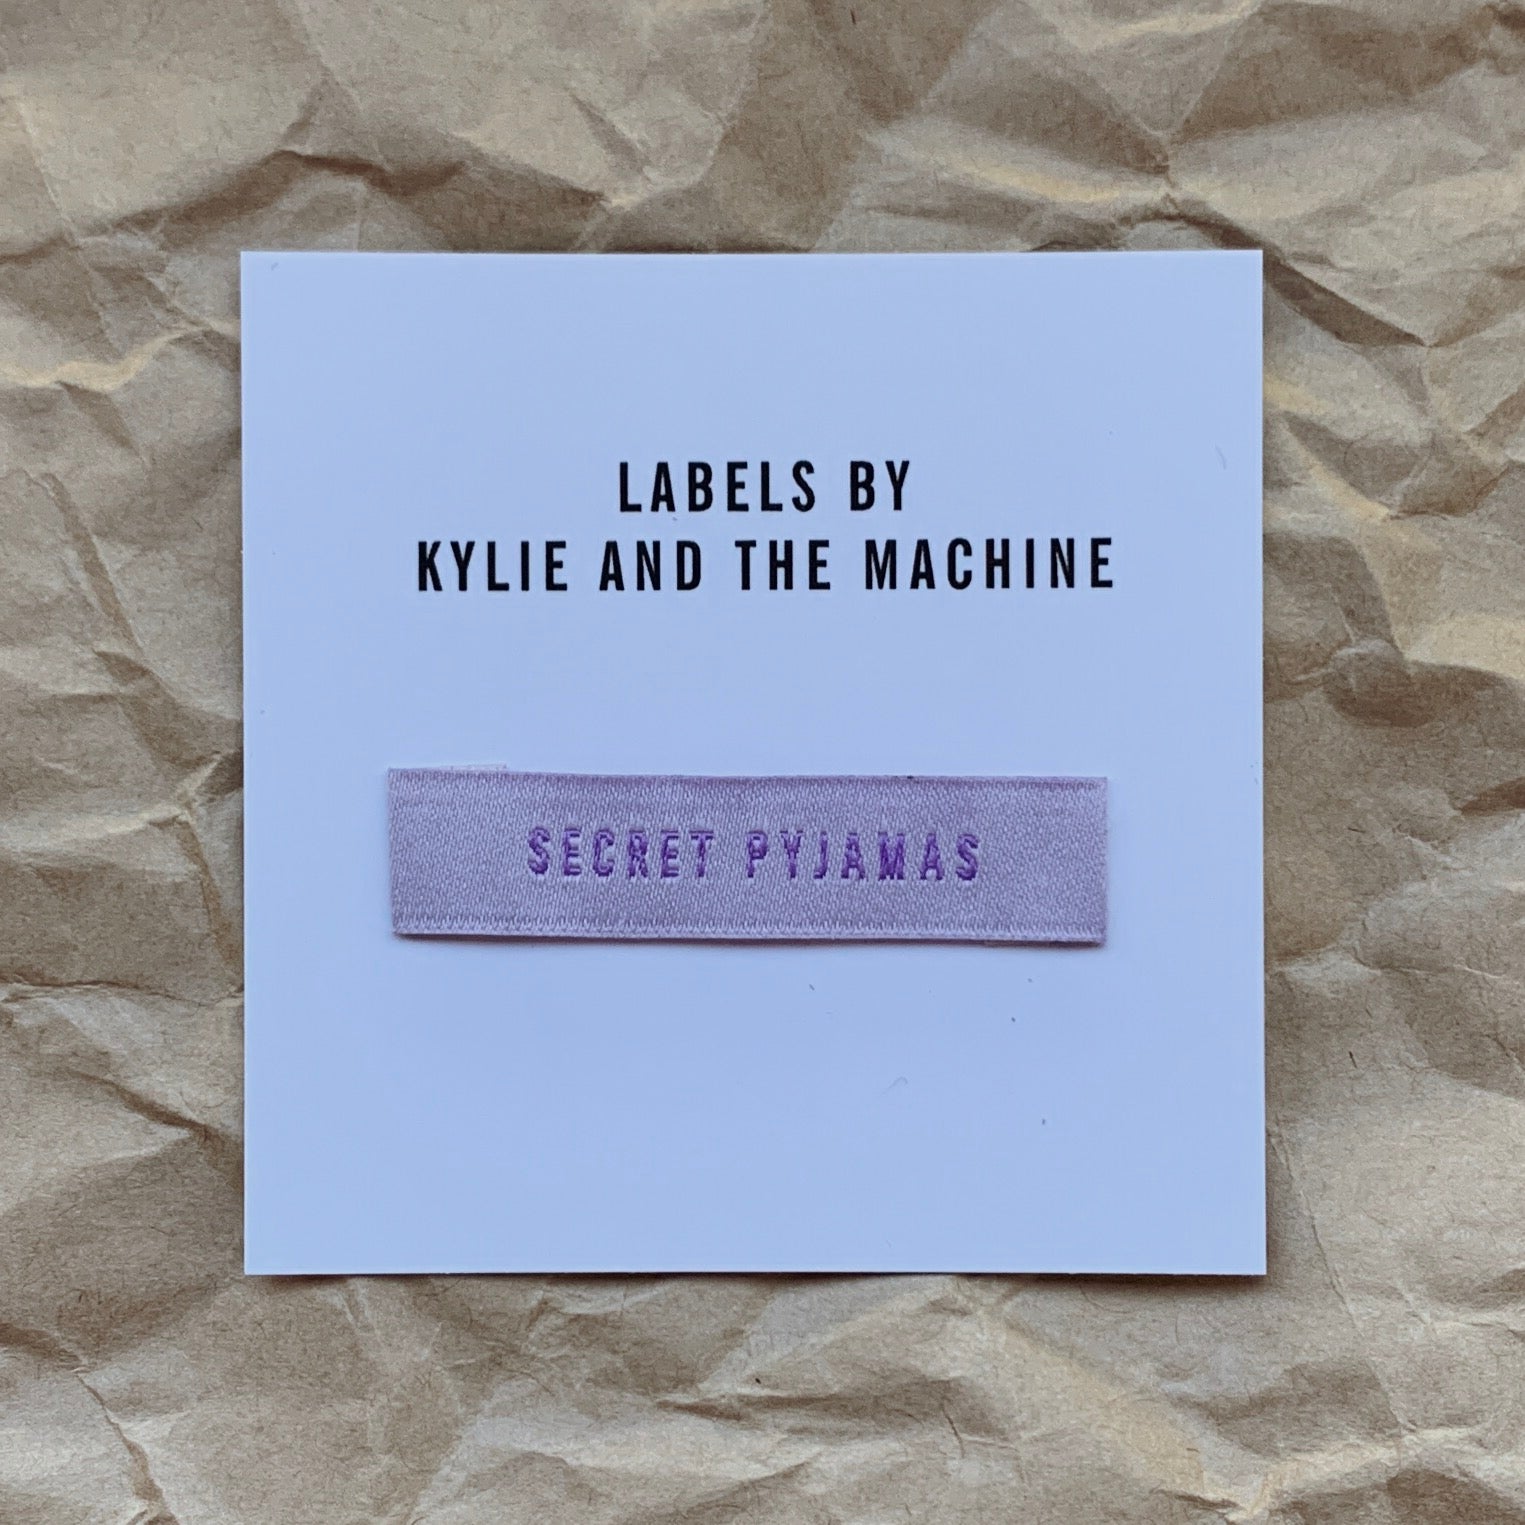 Kylie and the Machine - "SECRET PYJAMAS" Pack of 8 Woven Labels